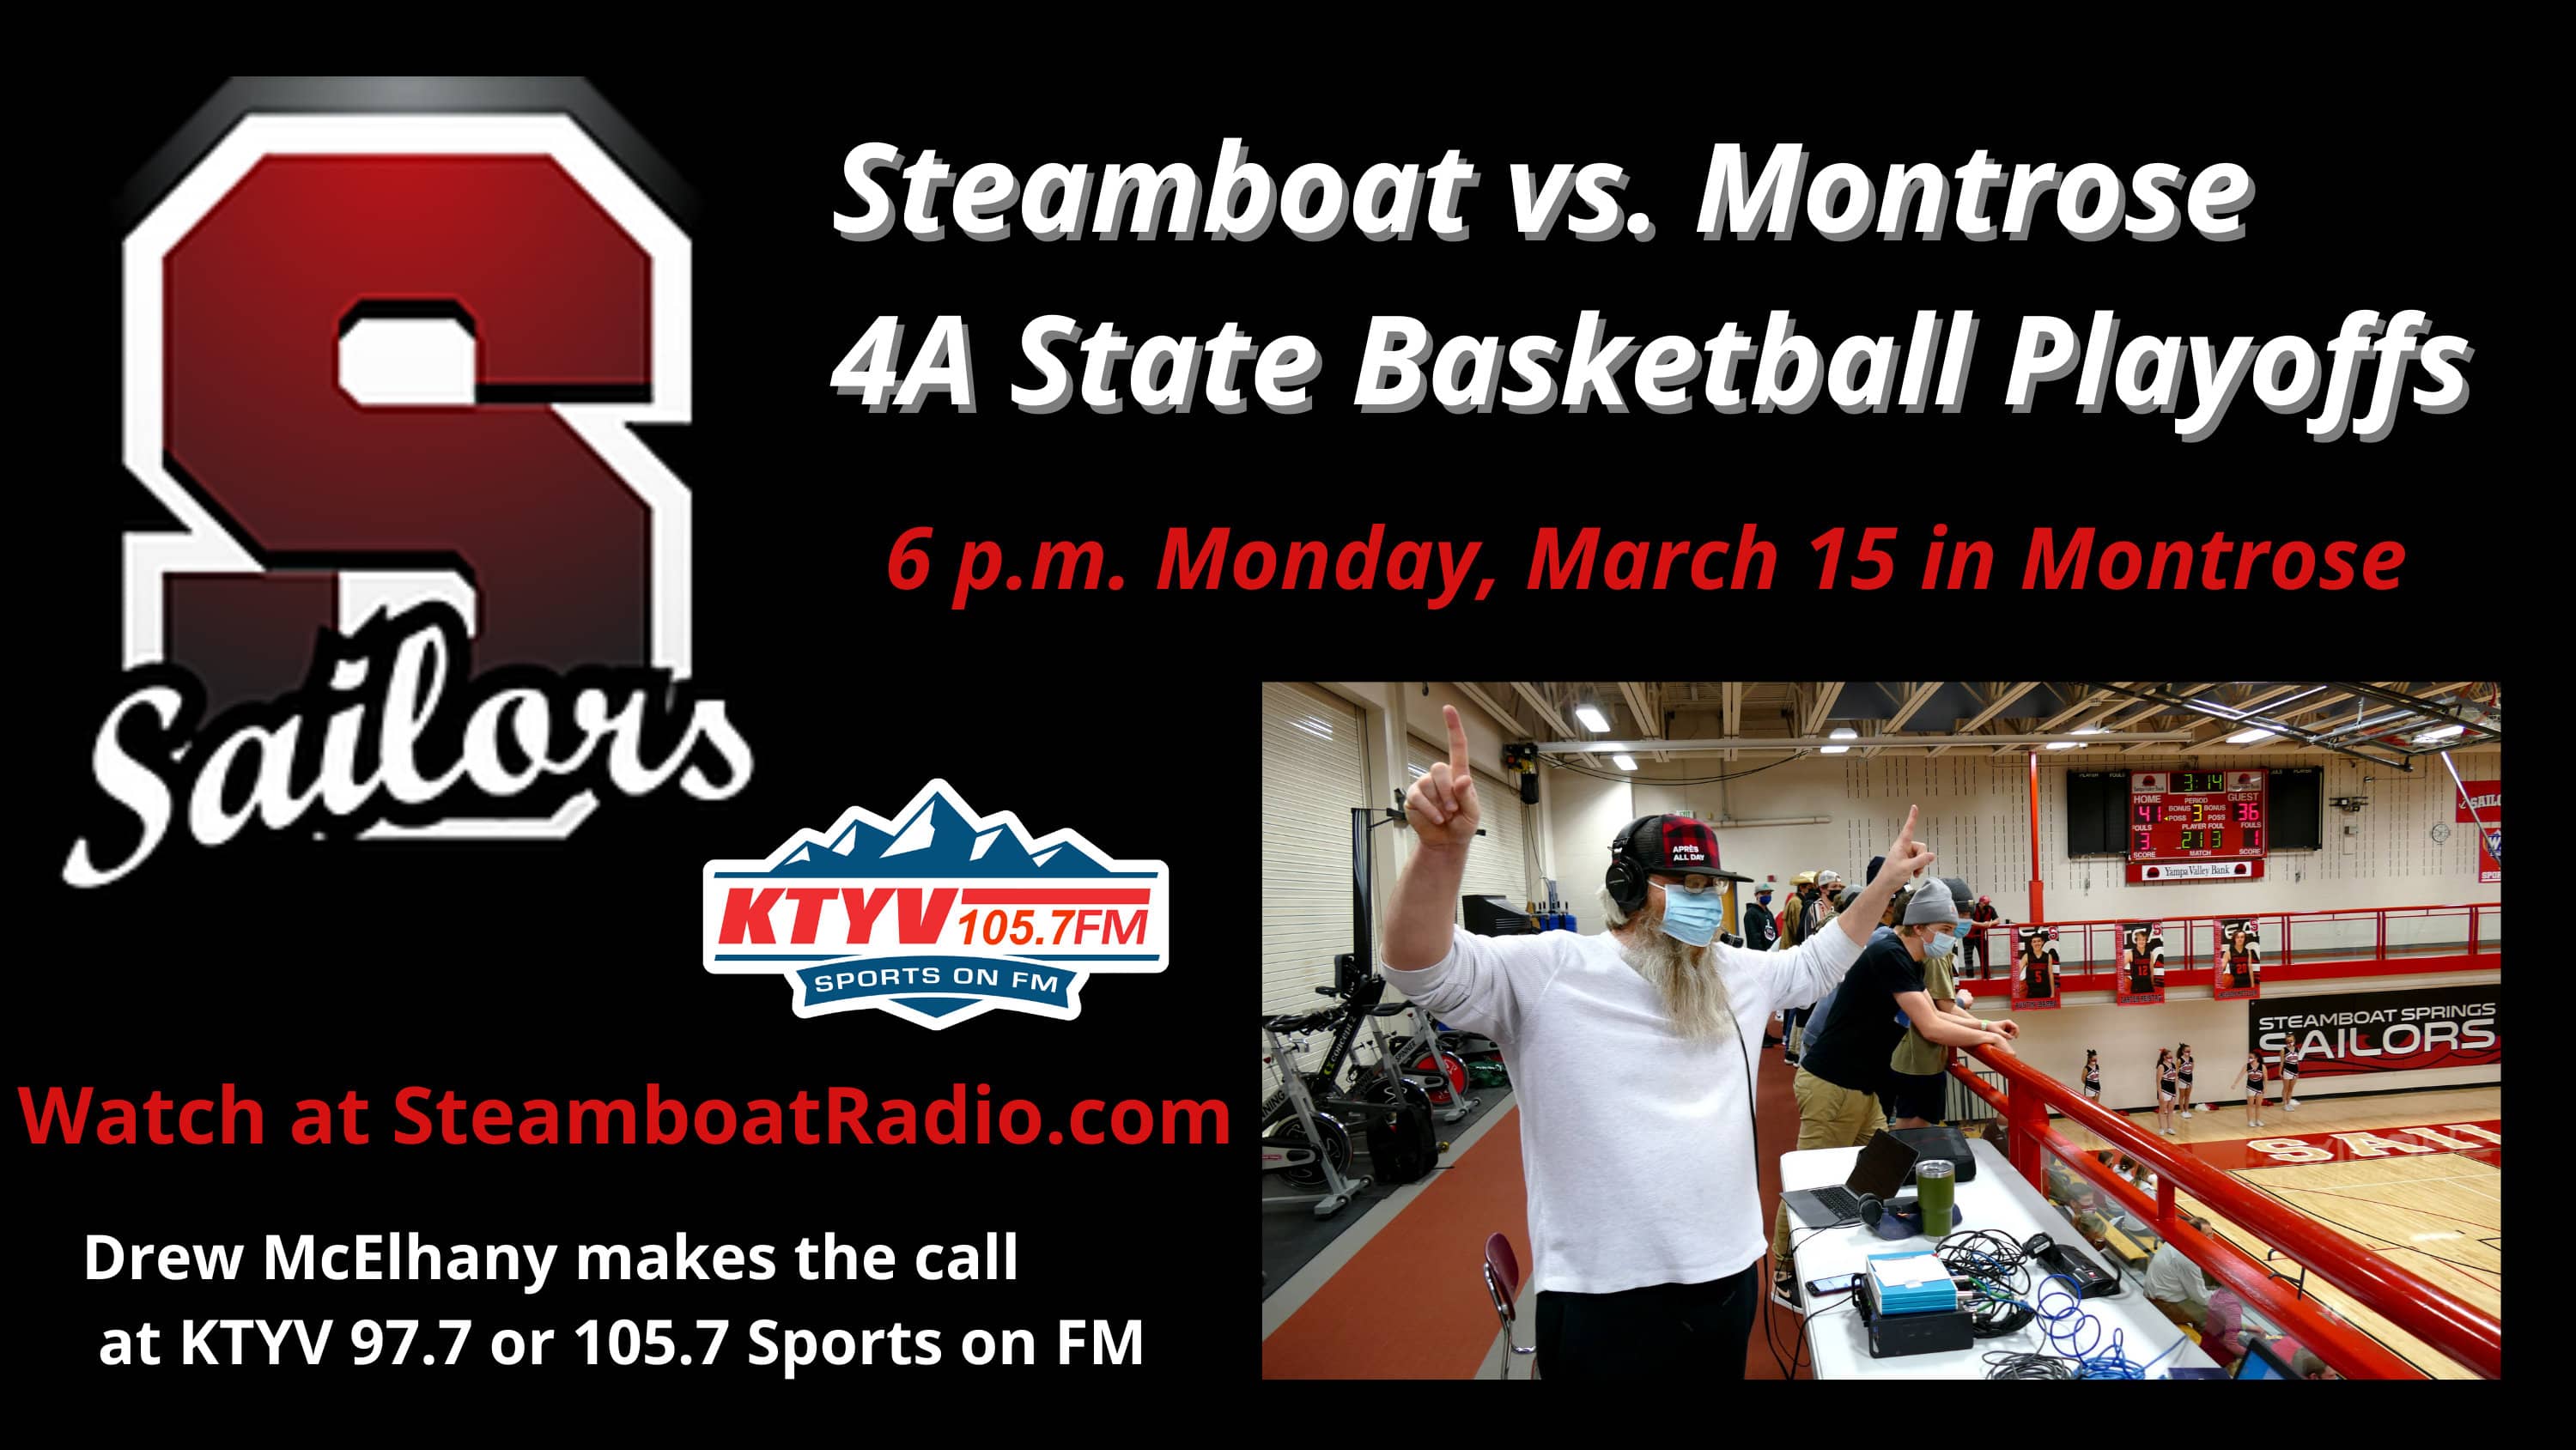 steamboat-vs-montrose-4a-state-basketball-playoffs